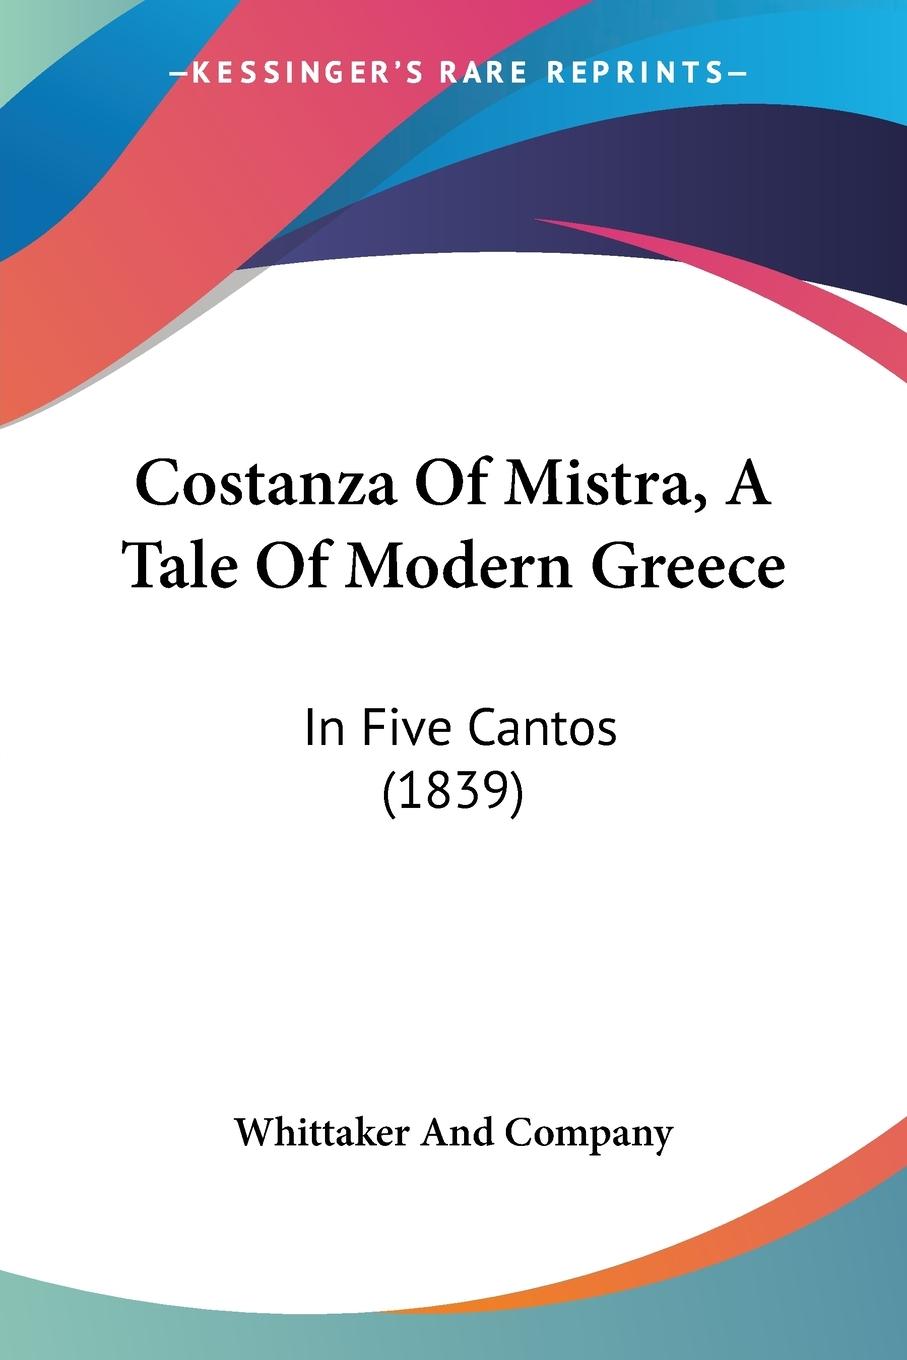 Costanza Of Mistra, A Tale Of Modern Greece - Whittaker And Company